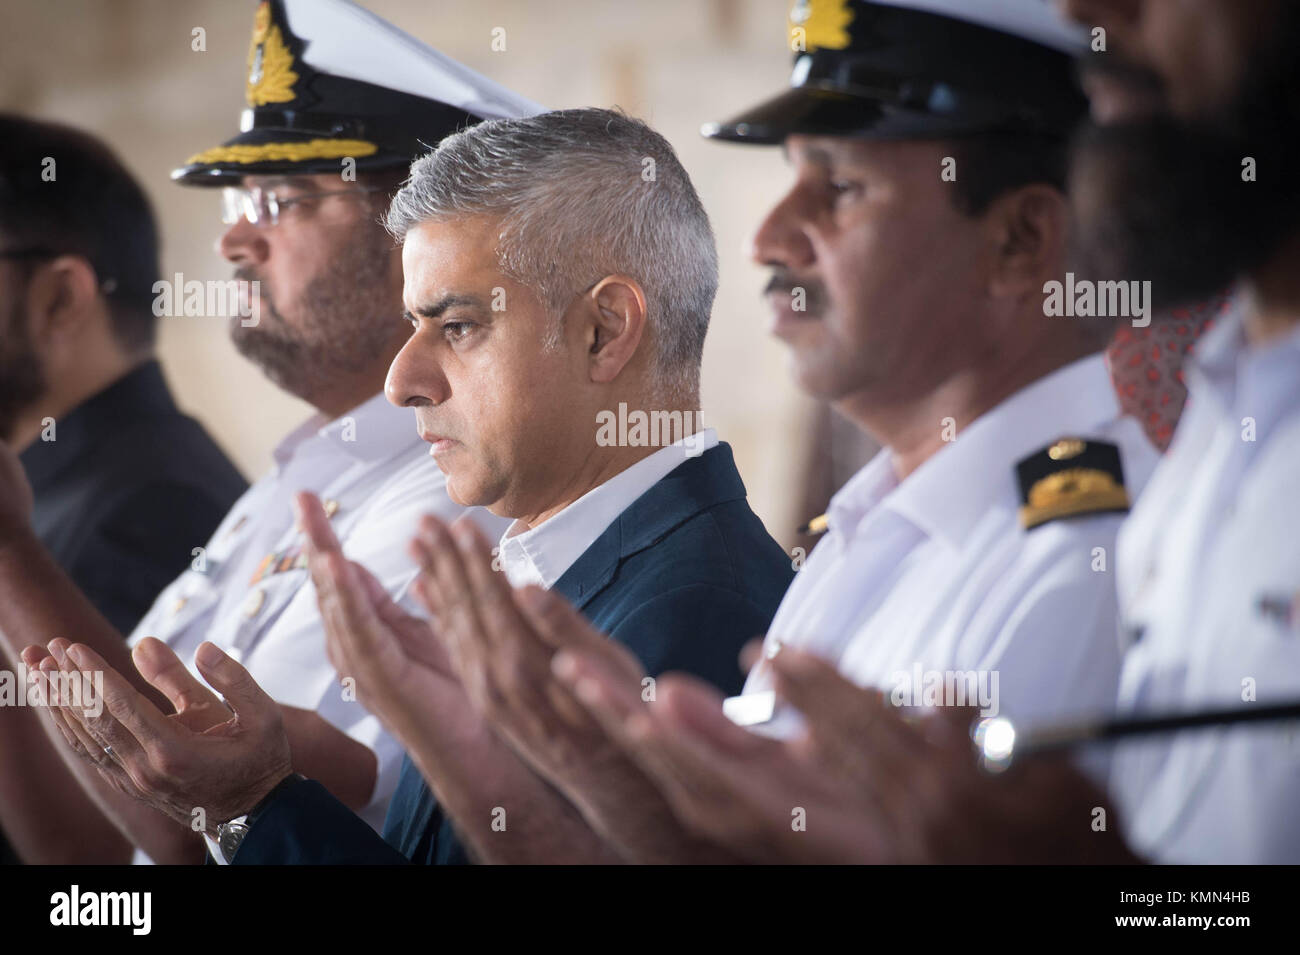 Mayor of London Sadiq Khan visits Mazar-e-Quaid, the final resting place and mausoleum of Muhammed Ali Jinnah, founder of Pakistan, in Karachi where the mayor paid his respects by laying a wreath then addressed the media. Stock Photo